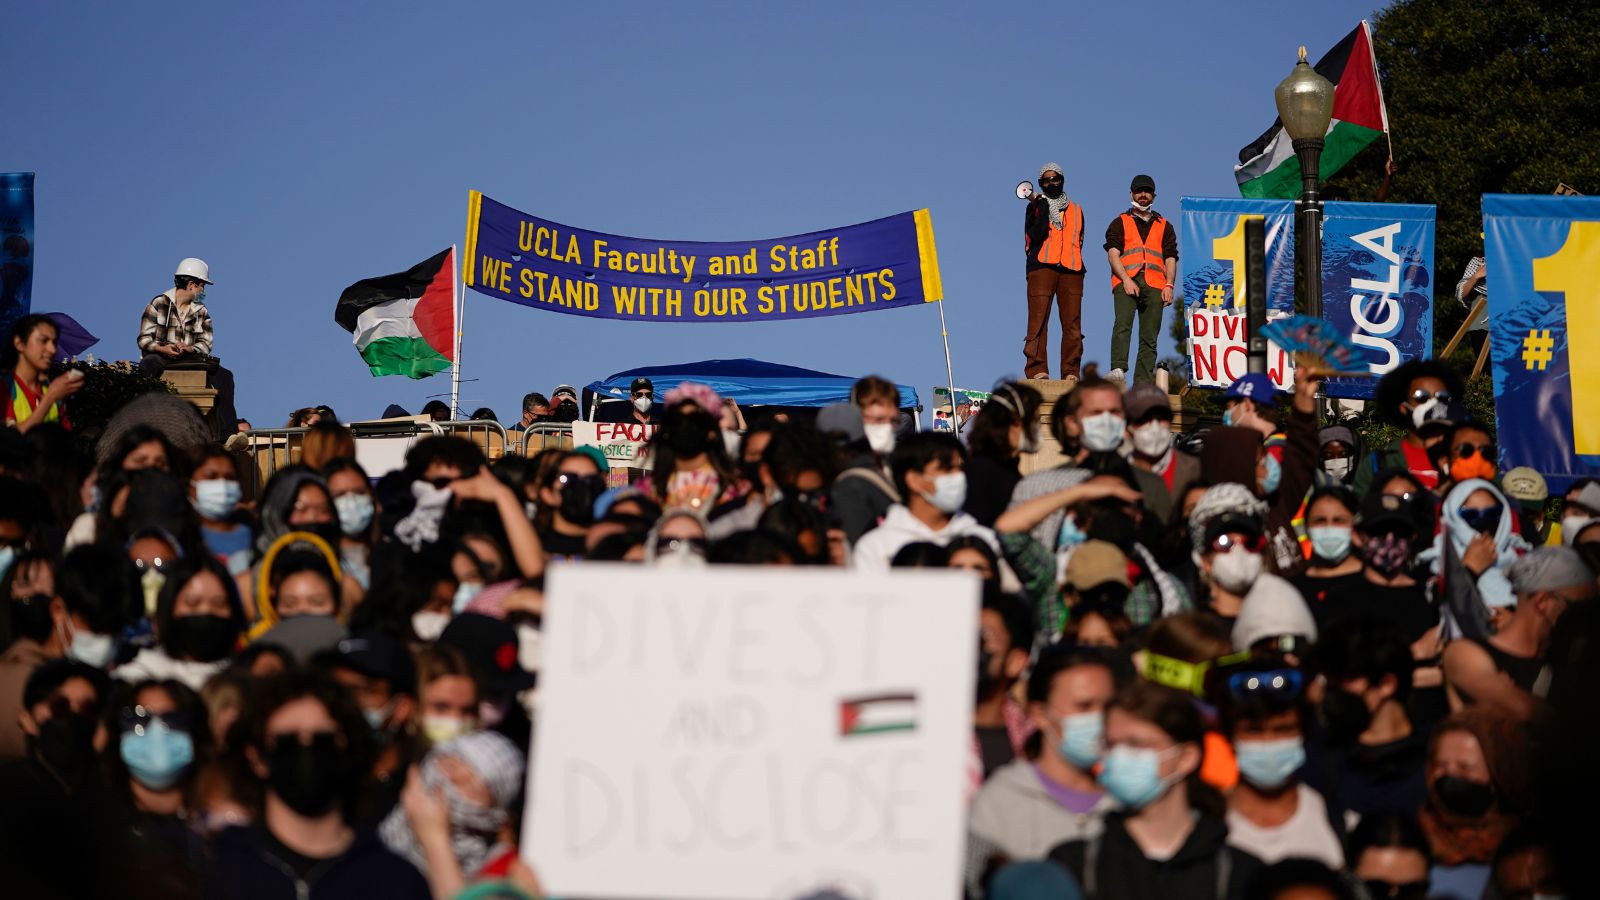 What do we know so far about the clash of protestors in UCLA